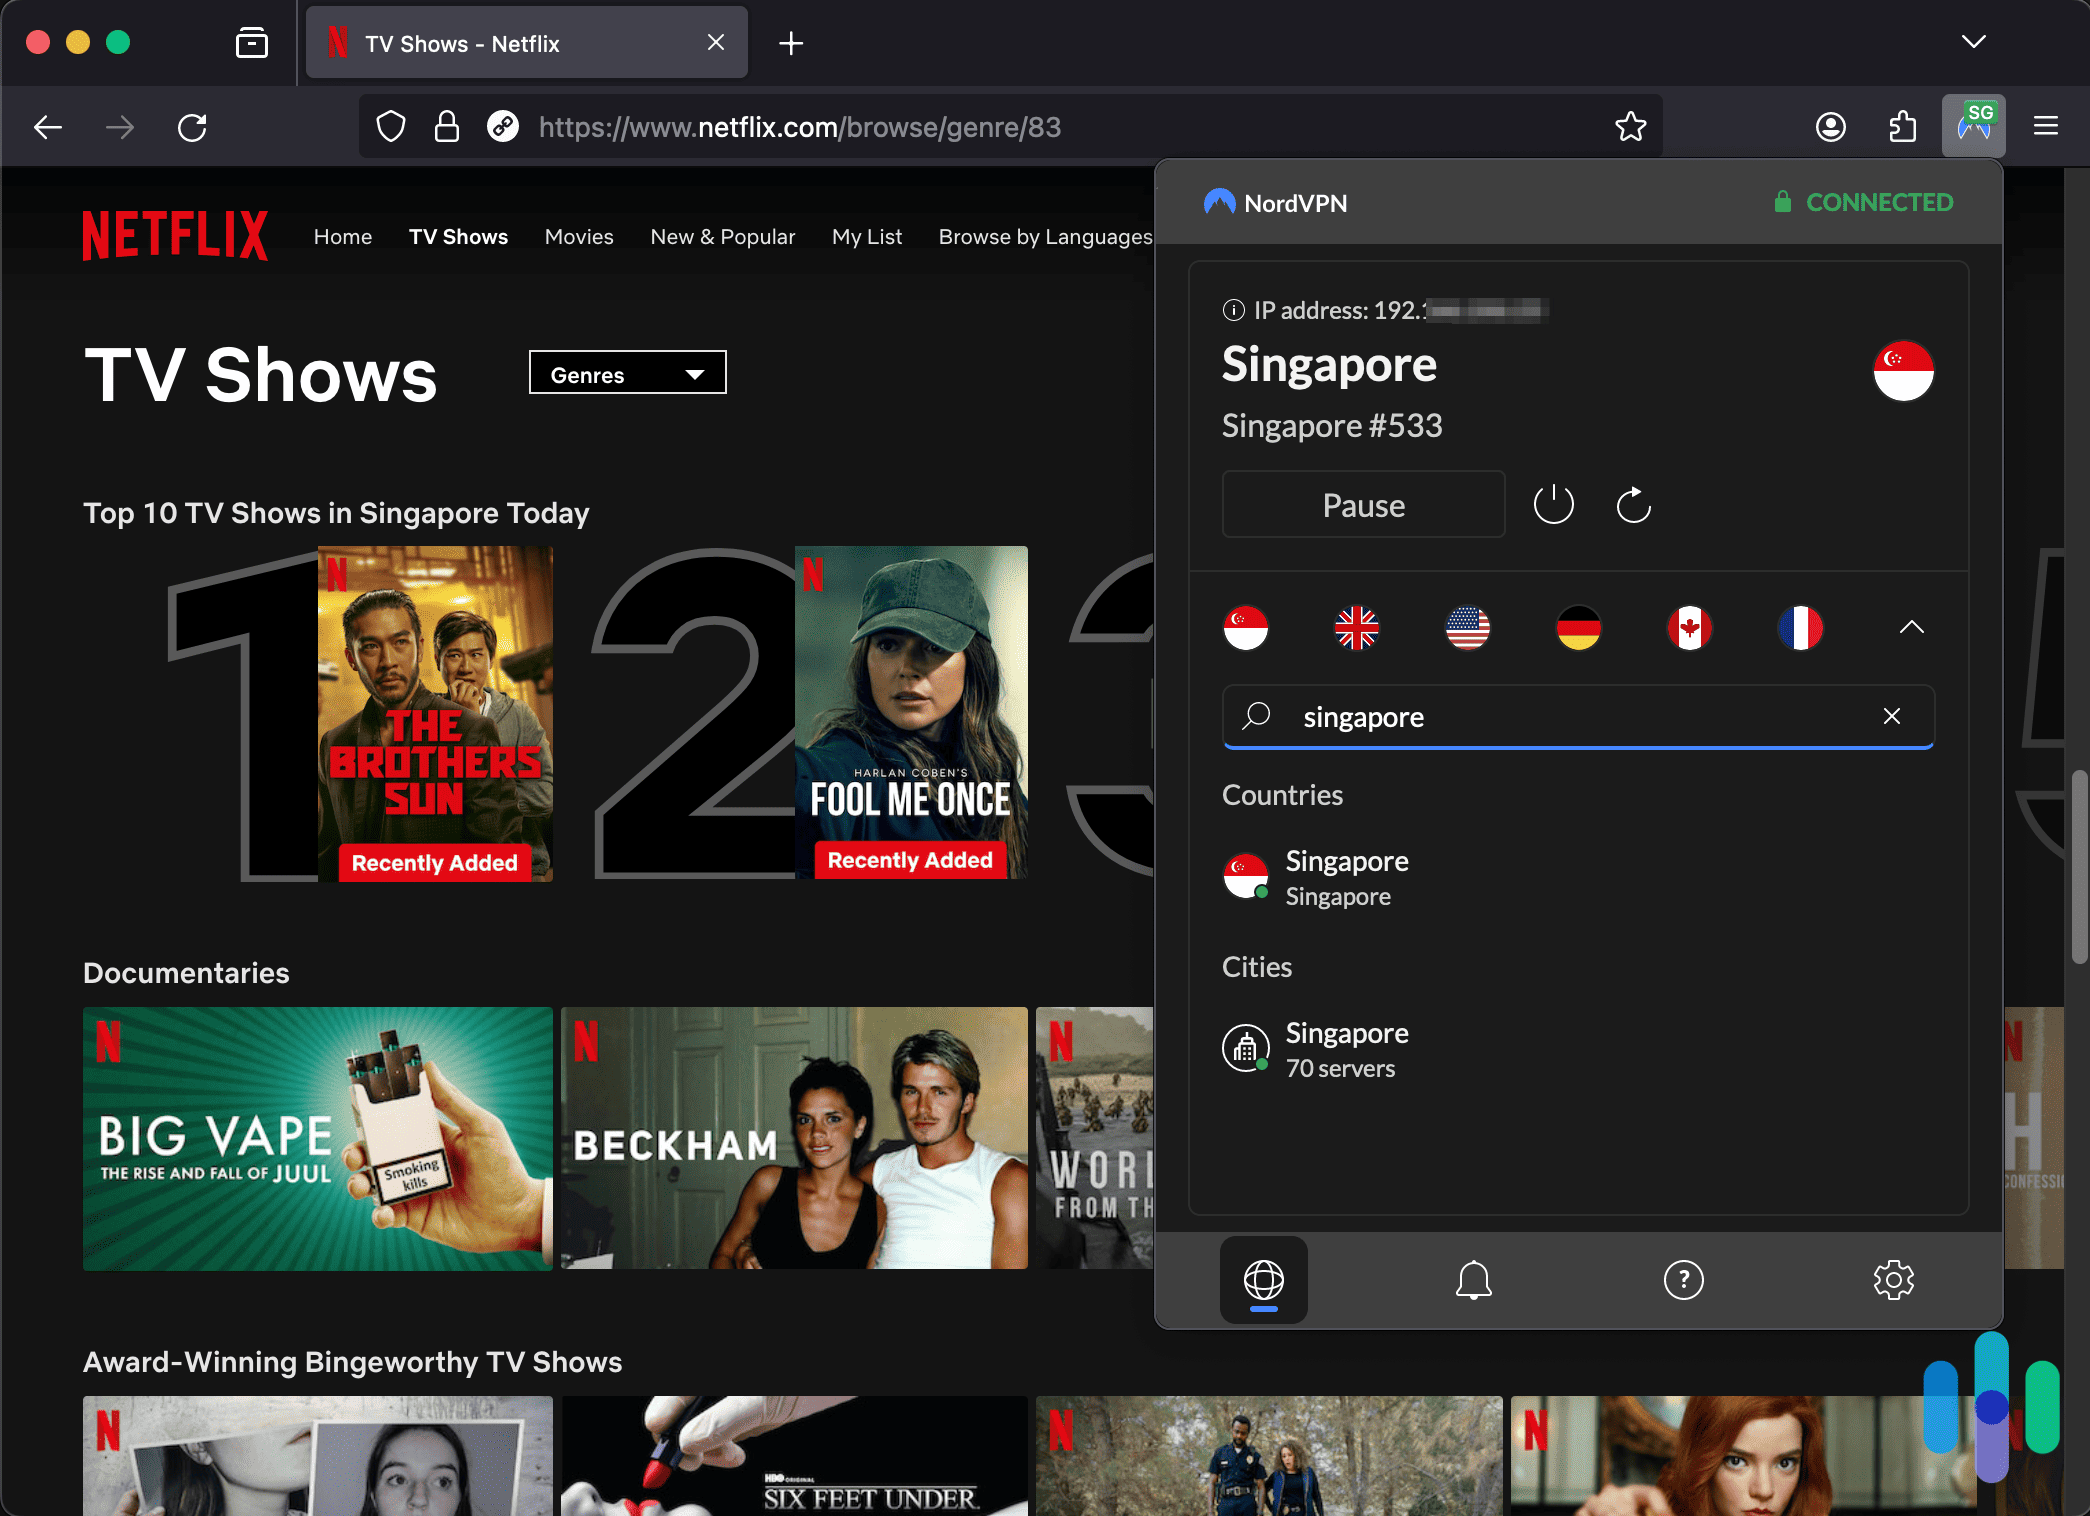 NordVPN with the Firefox extension connected to Singapore while viewing Netflix